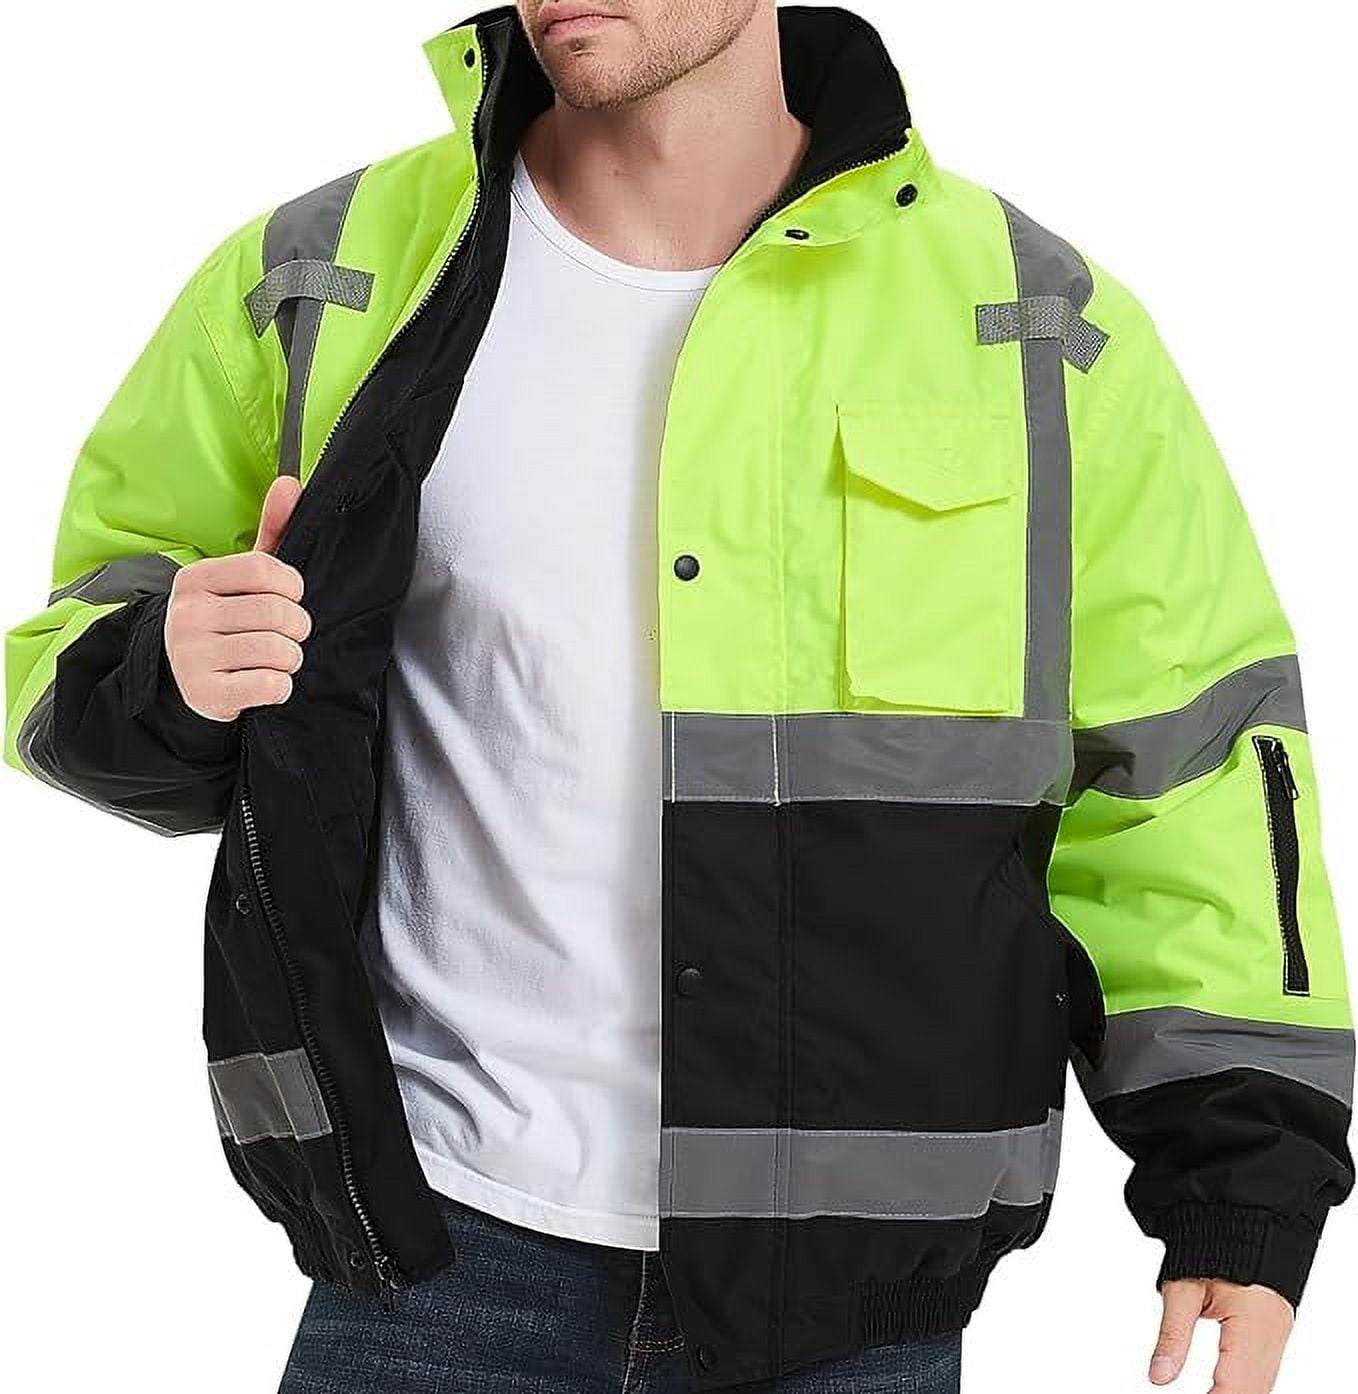 ProtectX High Visibility Safety Waterproof Bomber Jacket for Men, Hi Vis  Reflective Winter Construction Jacket, Class 3, Green, Large